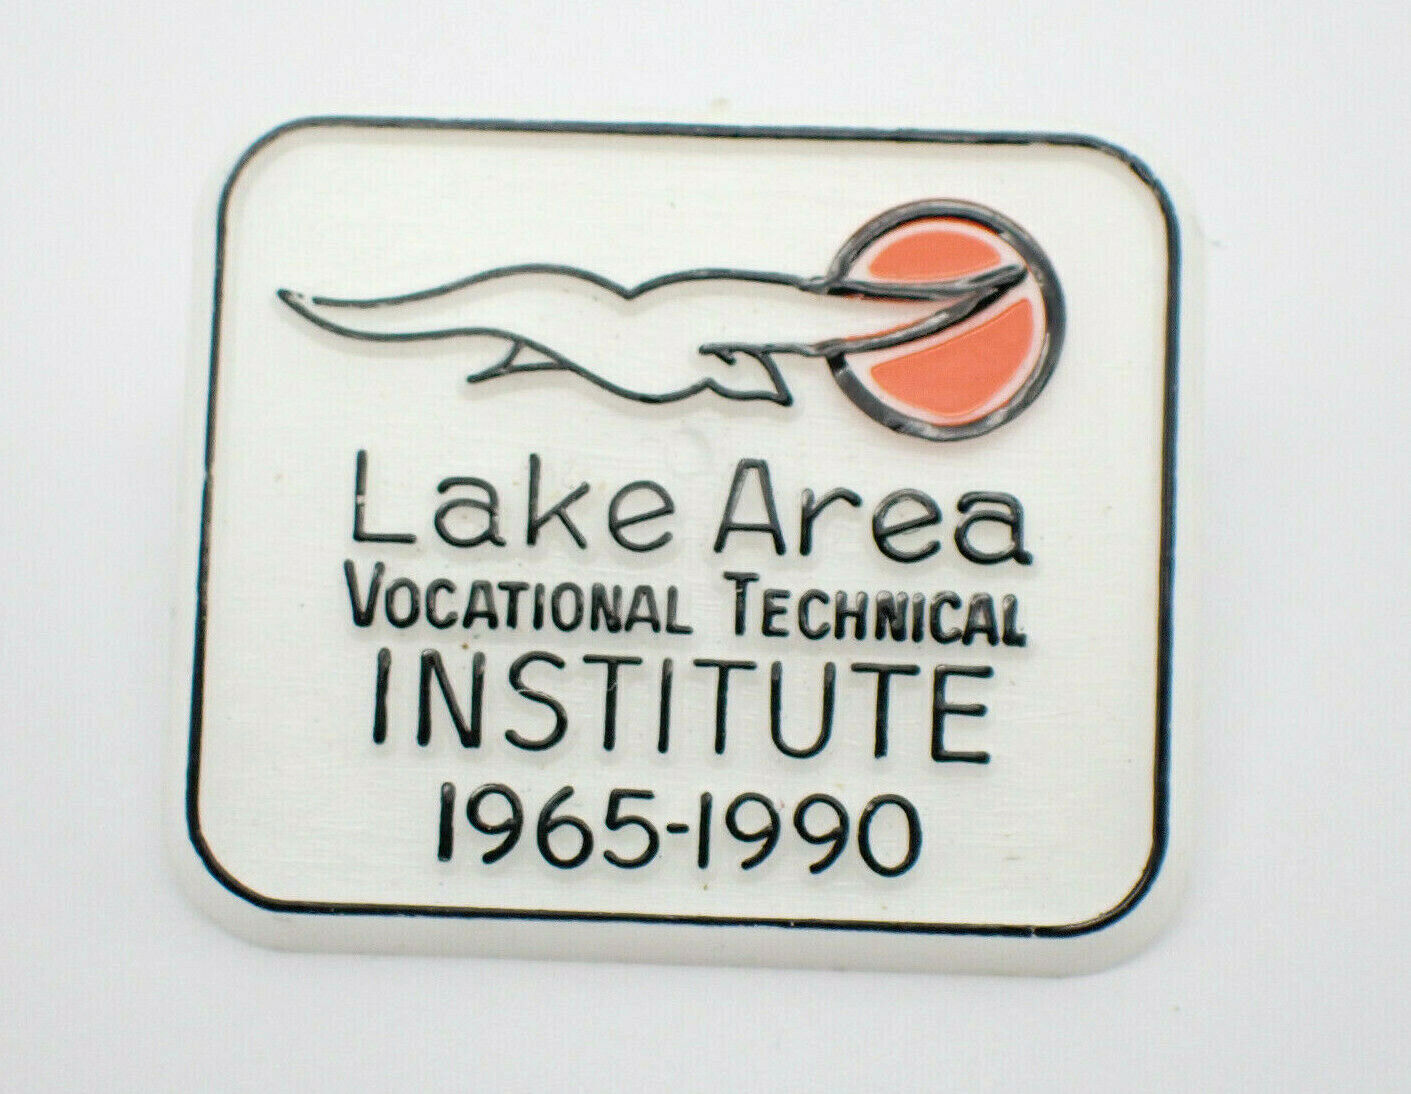 Lake Area Vocational Technical Institute Vintage Lapel Pin